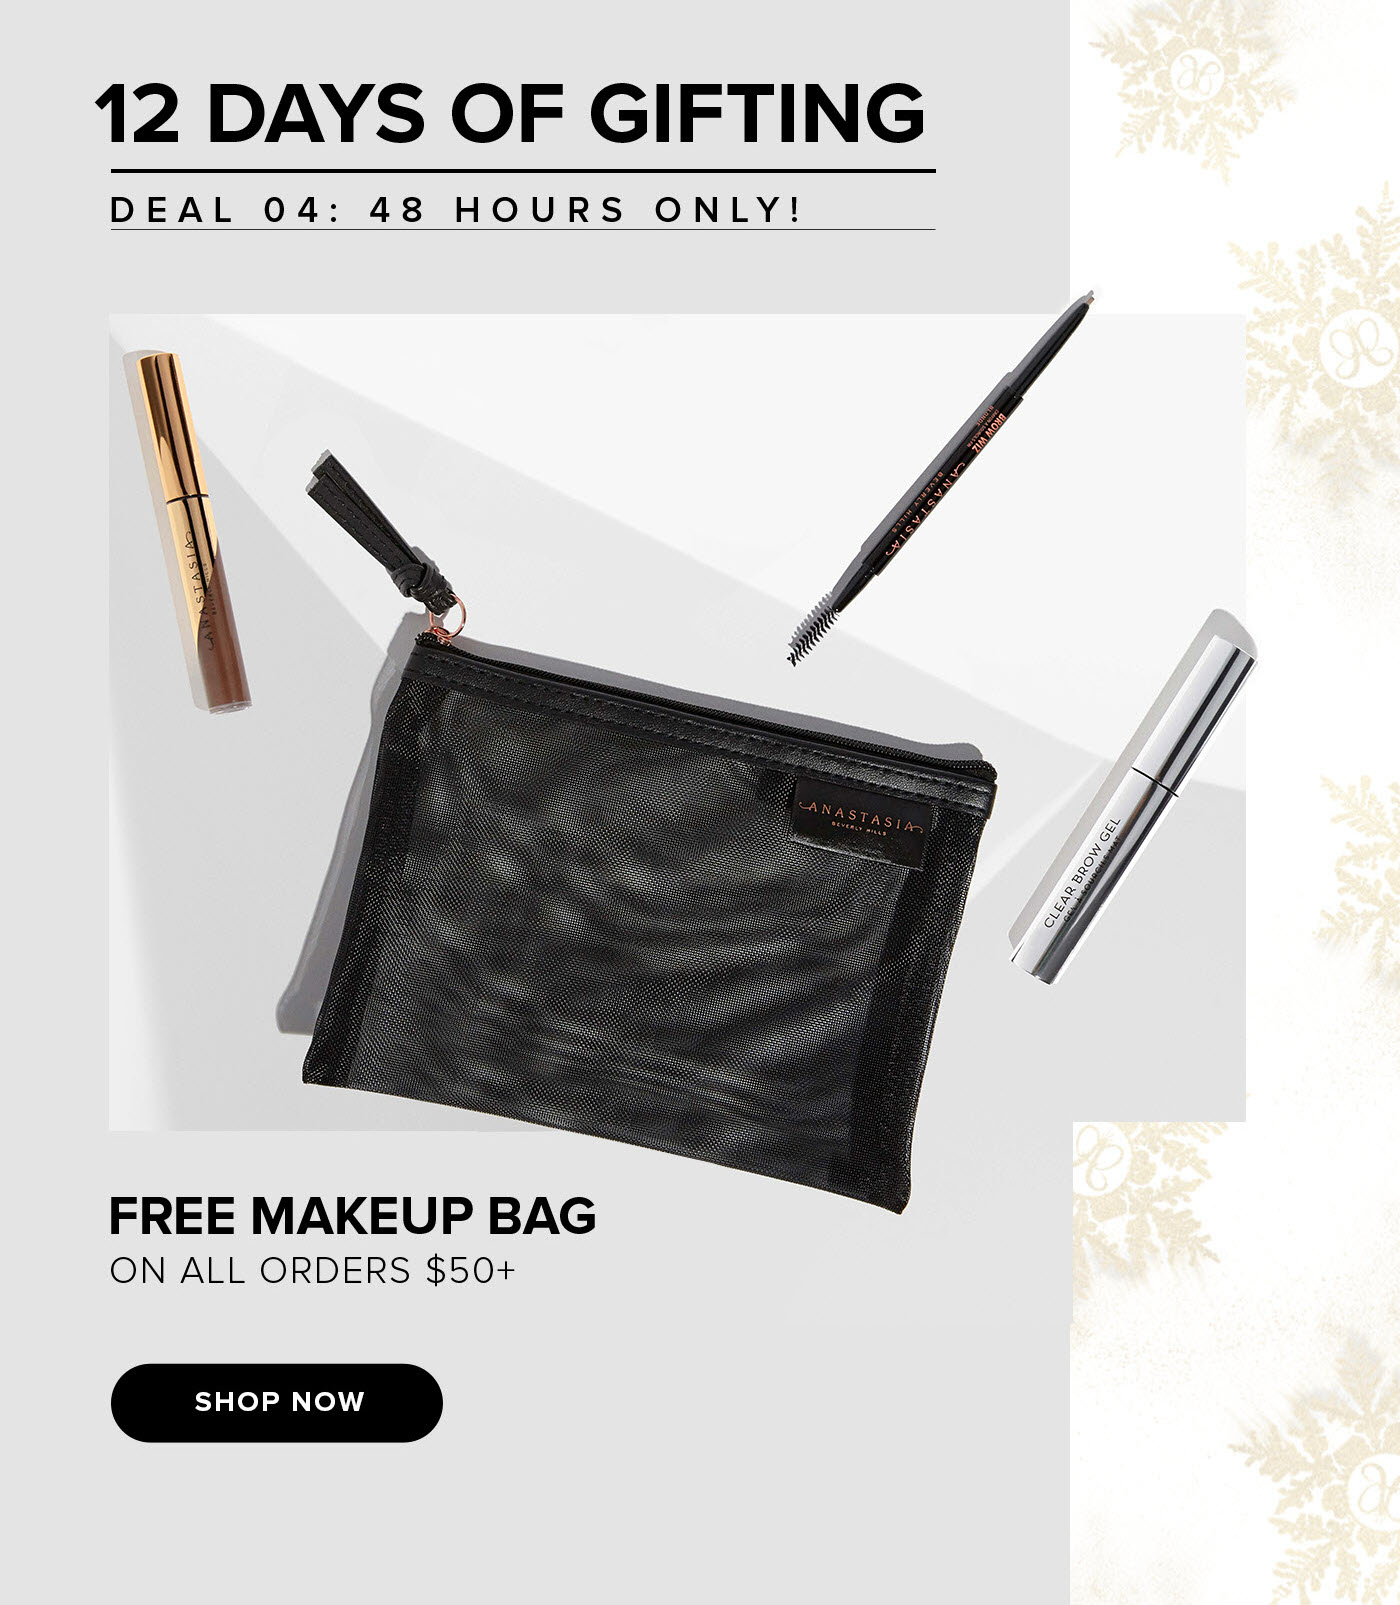 12 Days of Gifting - Deal 4: Free Makeup Bag on Orders $50+